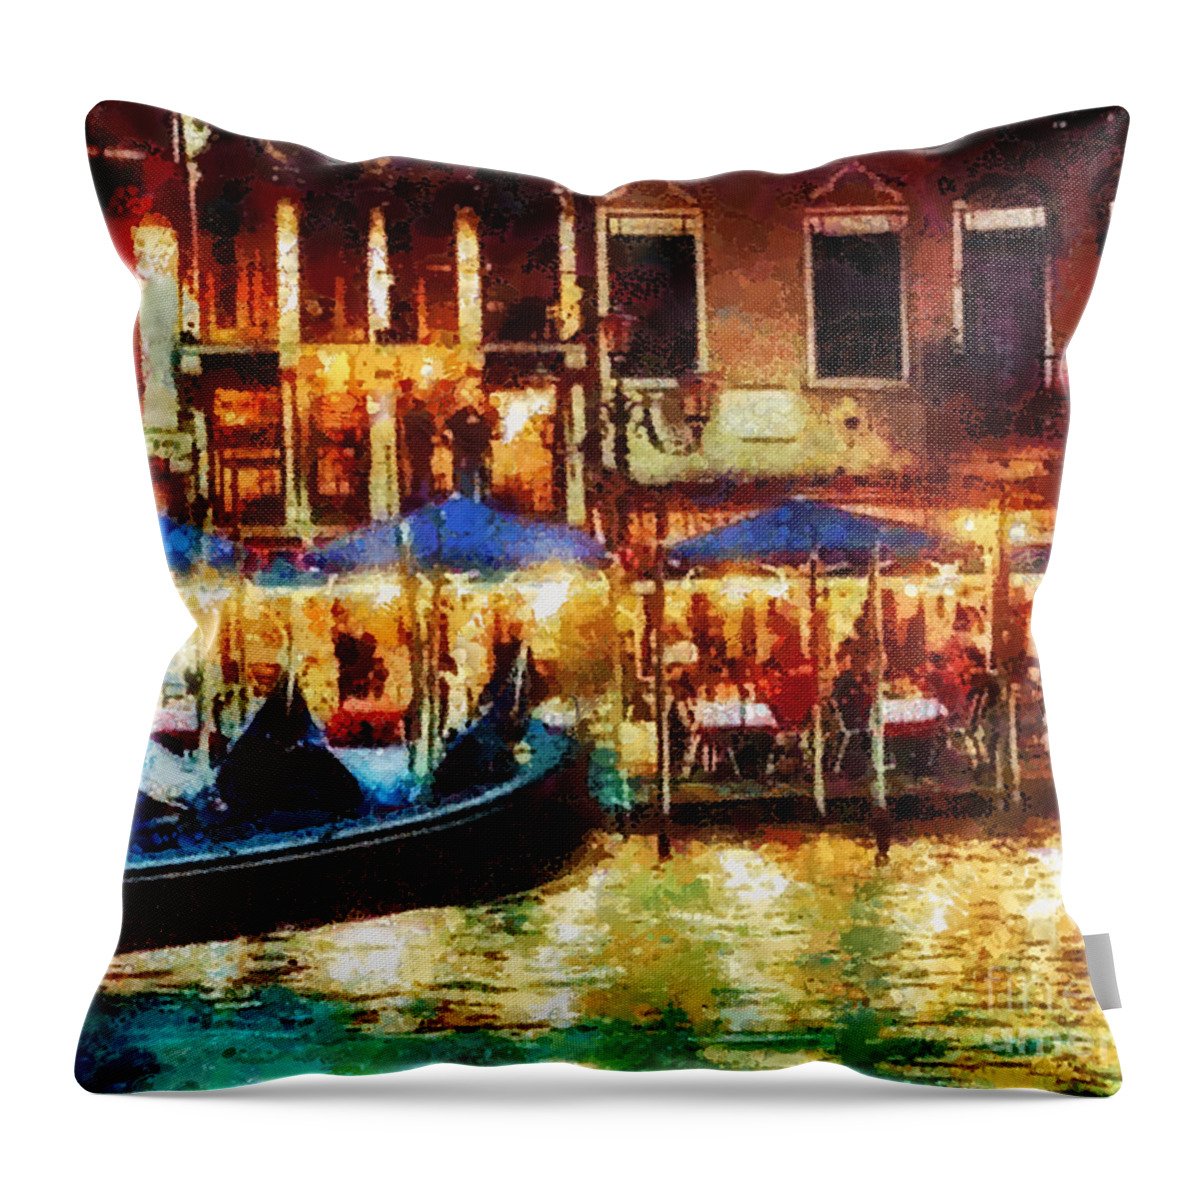 Venice Glow Throw Pillow featuring the painting Venice Glow by Mo T